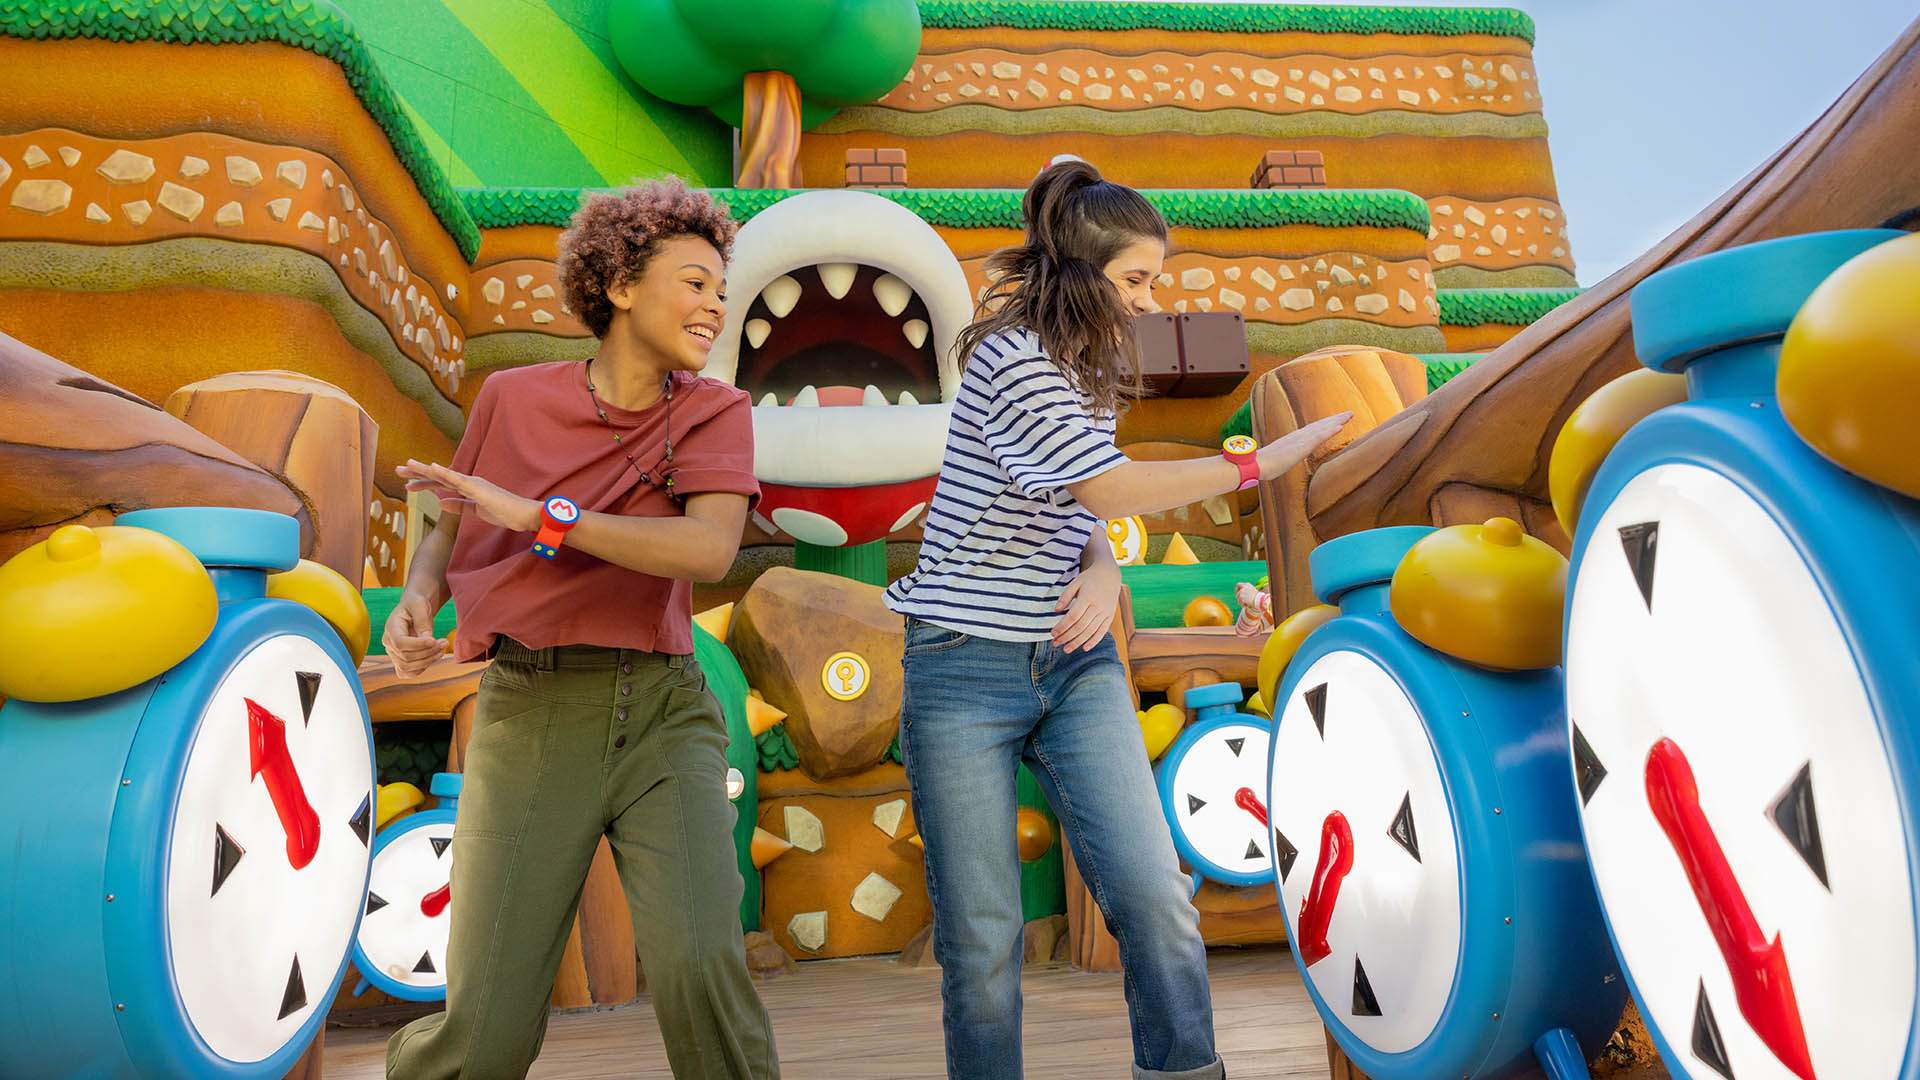 Now Open: Hollywood's New Super Nintendo Theme Park with IRL 'Mario Kart' Is Welcoming in Fans